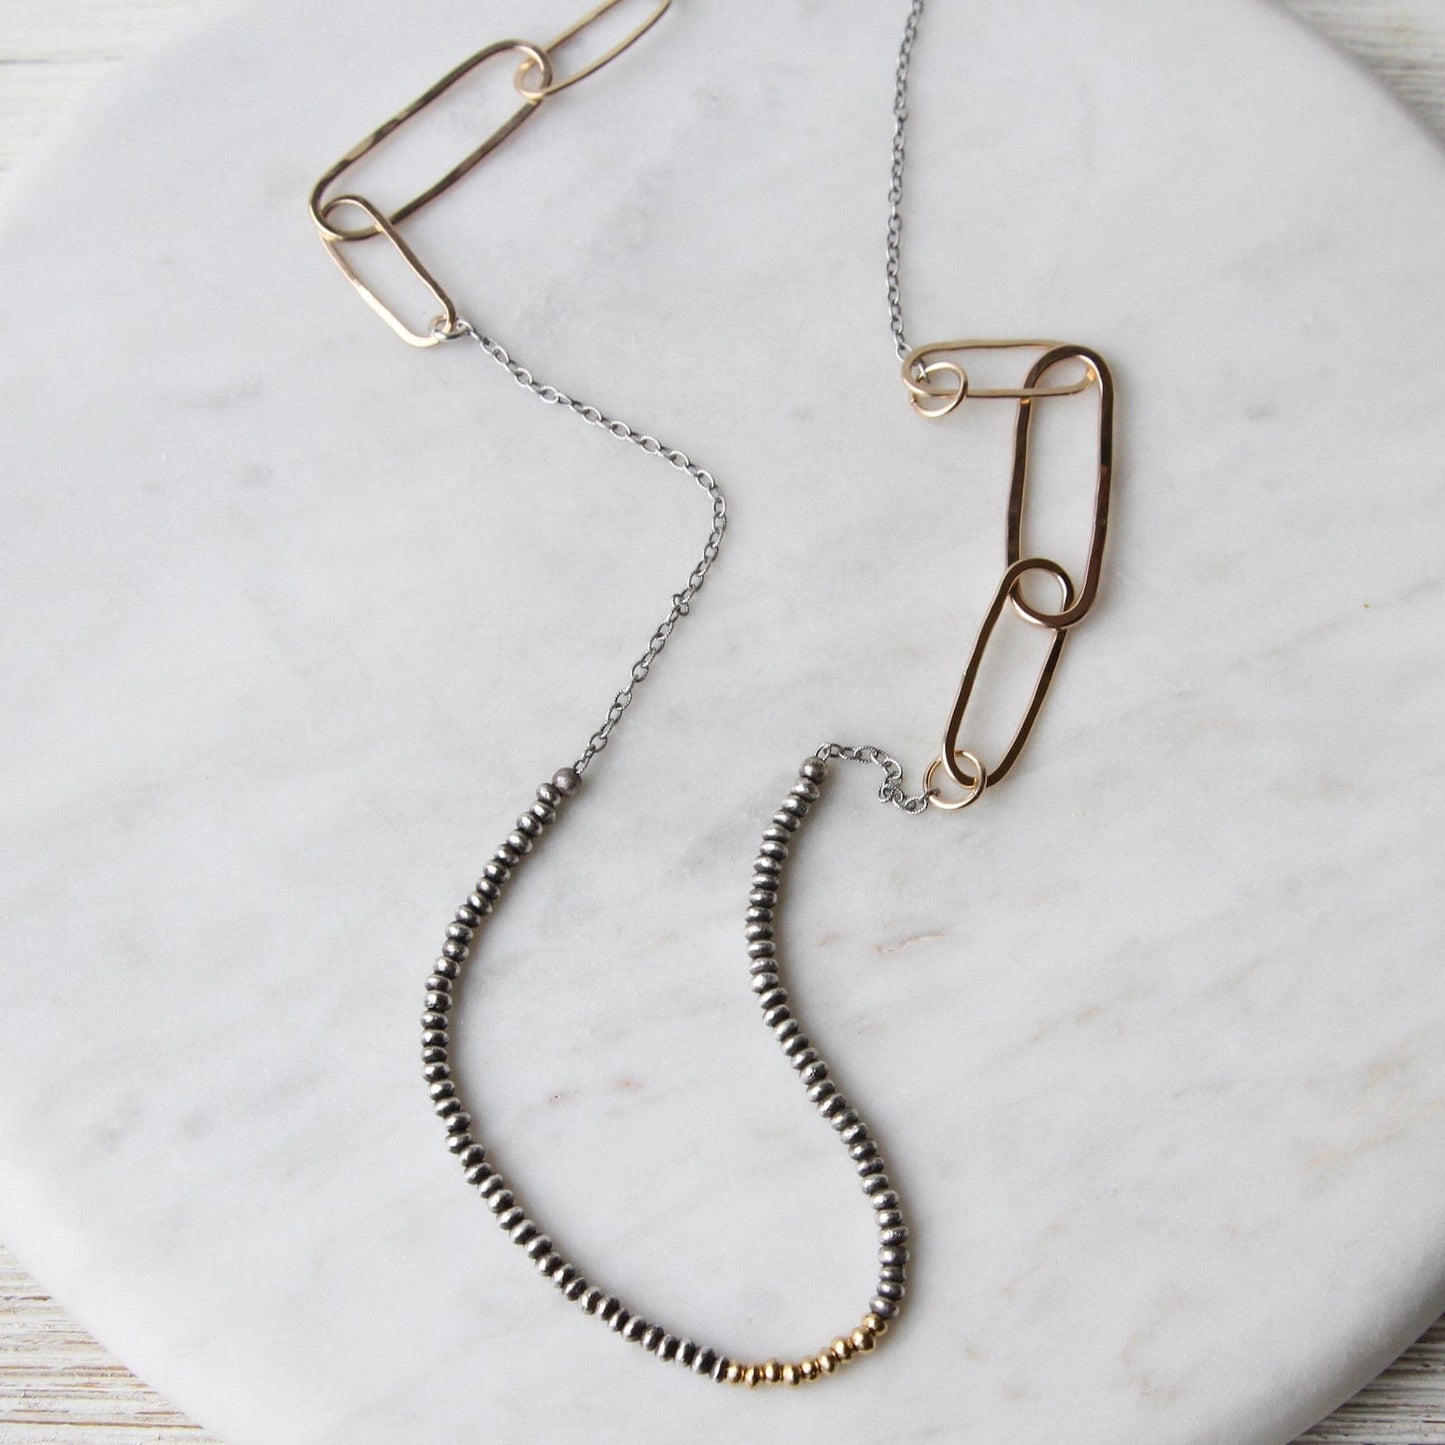 NKL-GF Oxidized Sterling Silver Nuggets & Gold Filled Necklace